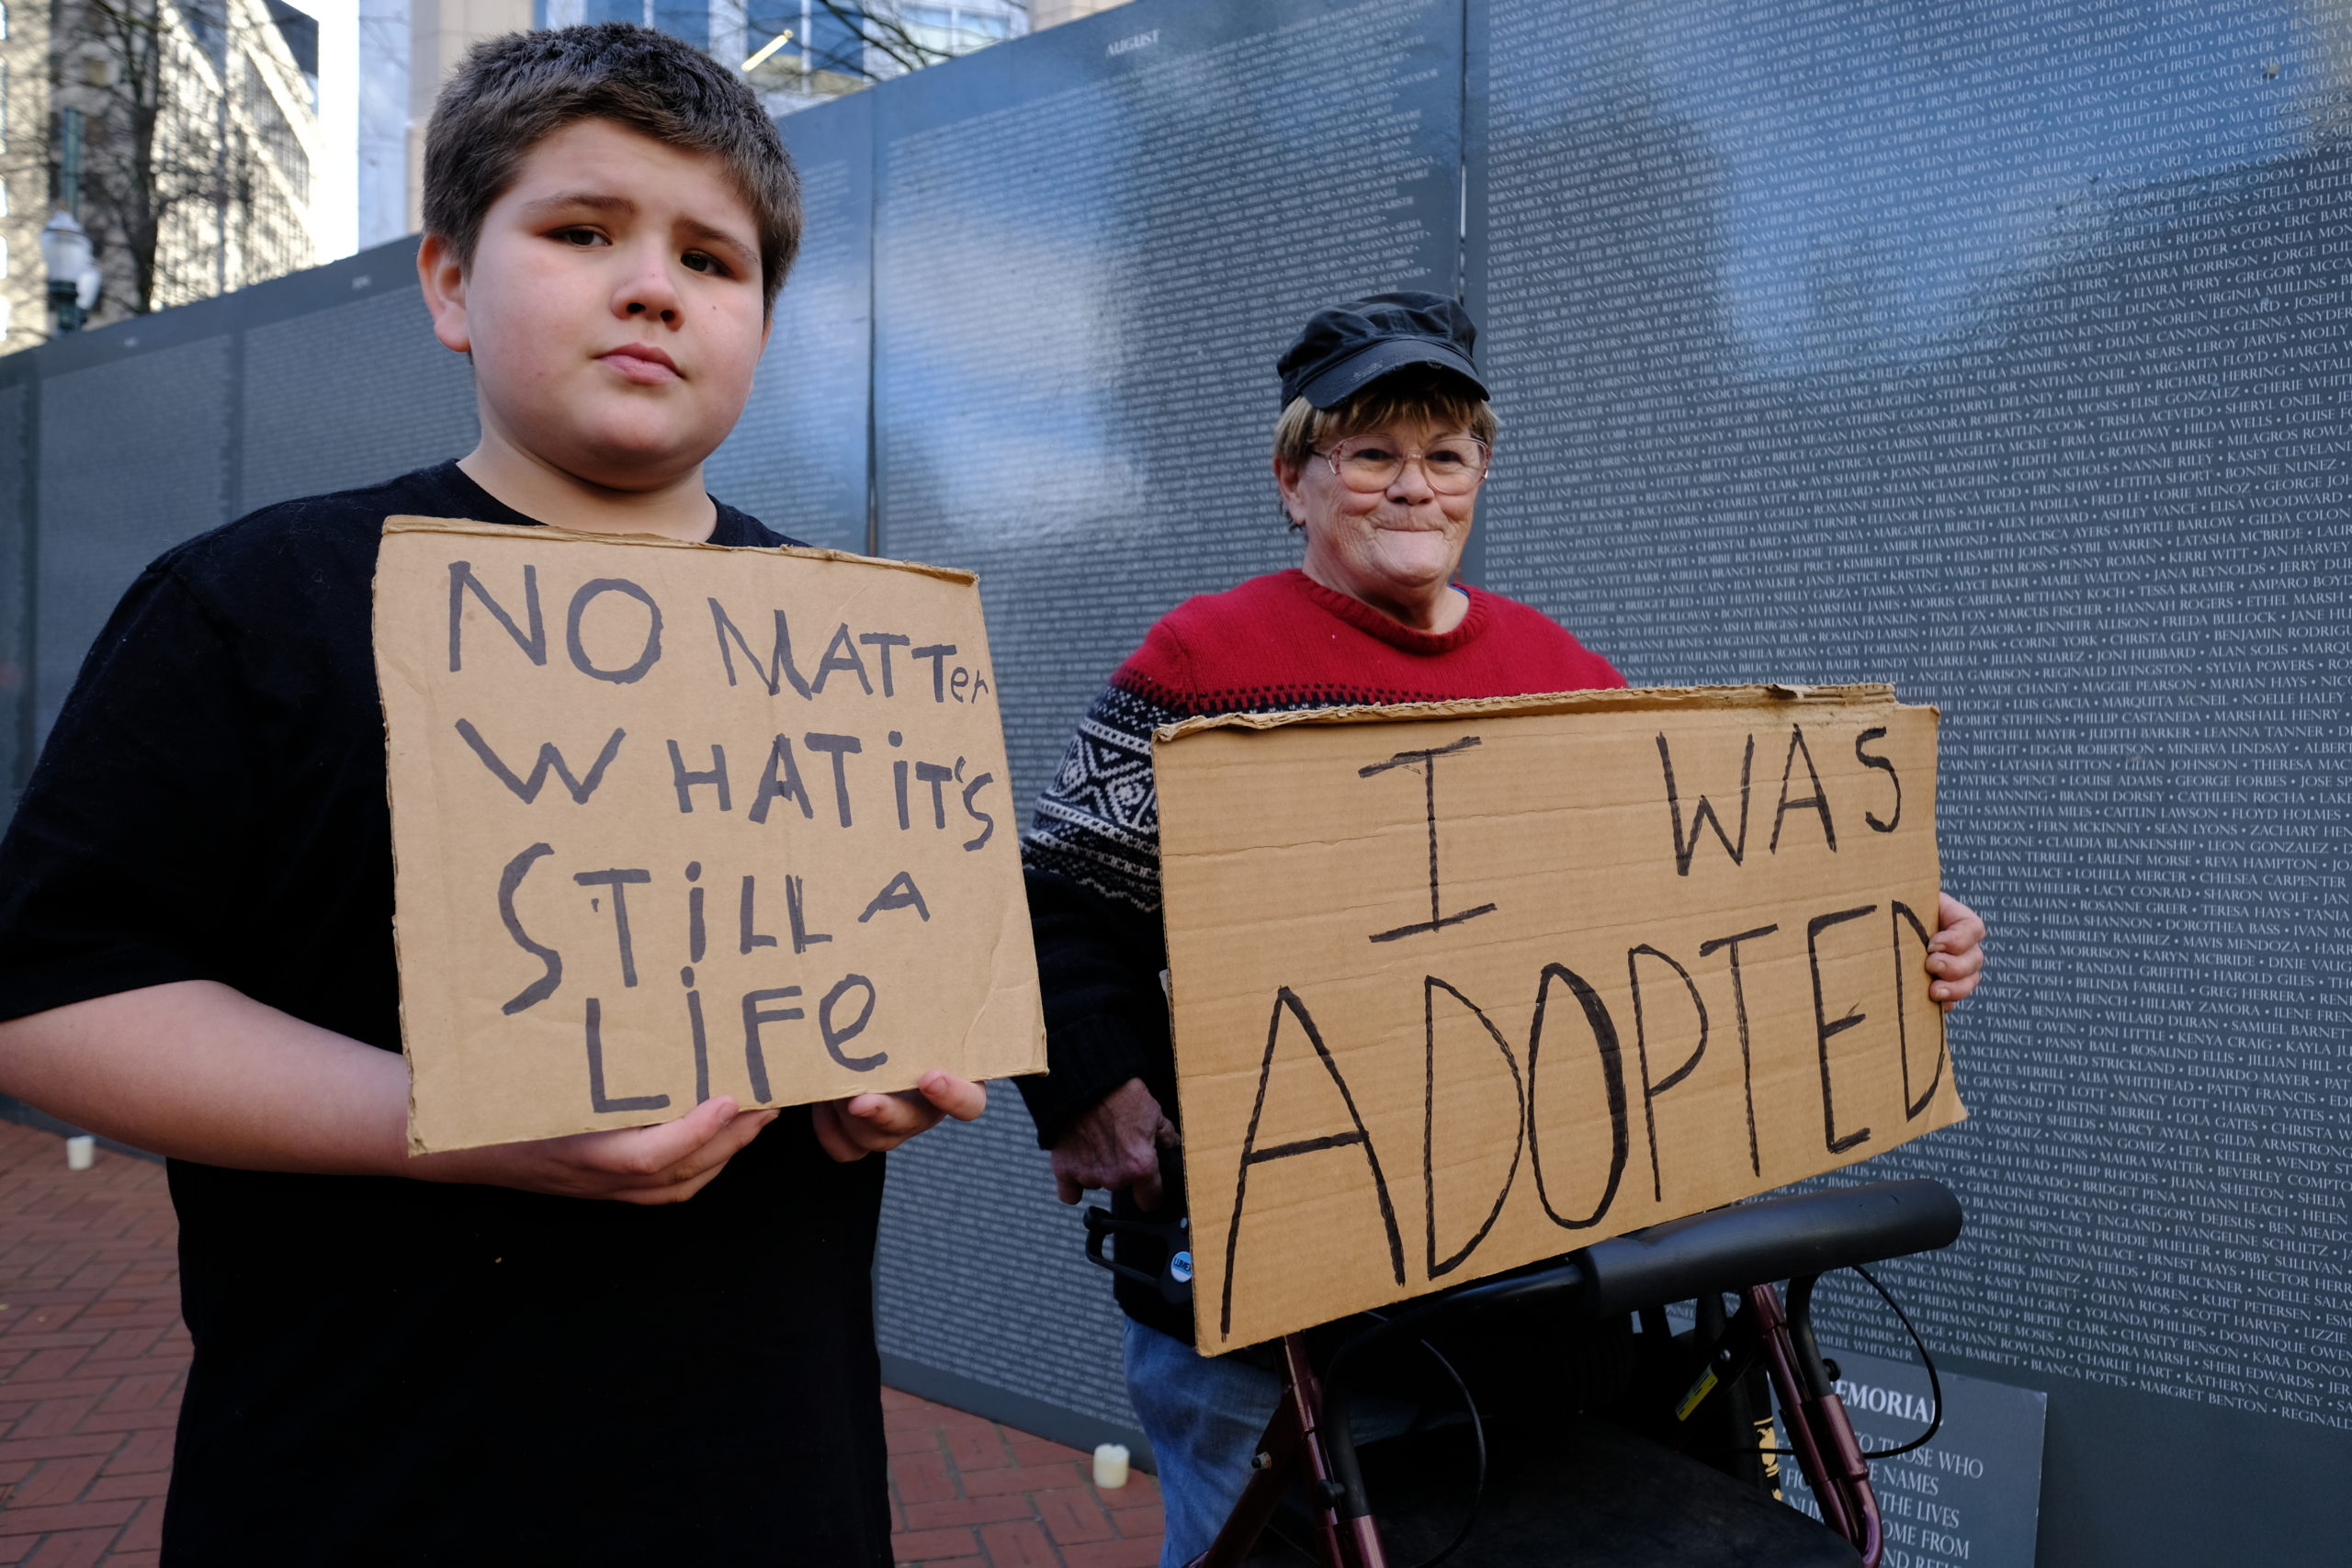 Pro-life supporters rally in Pioneer Courthouse Square in Portland, Oregon, on January 14, 2018, 45 years after the Supreme Court case of Roe v. Wade. Since the court overturned Roe in June, more have looked to adoption as a solution   